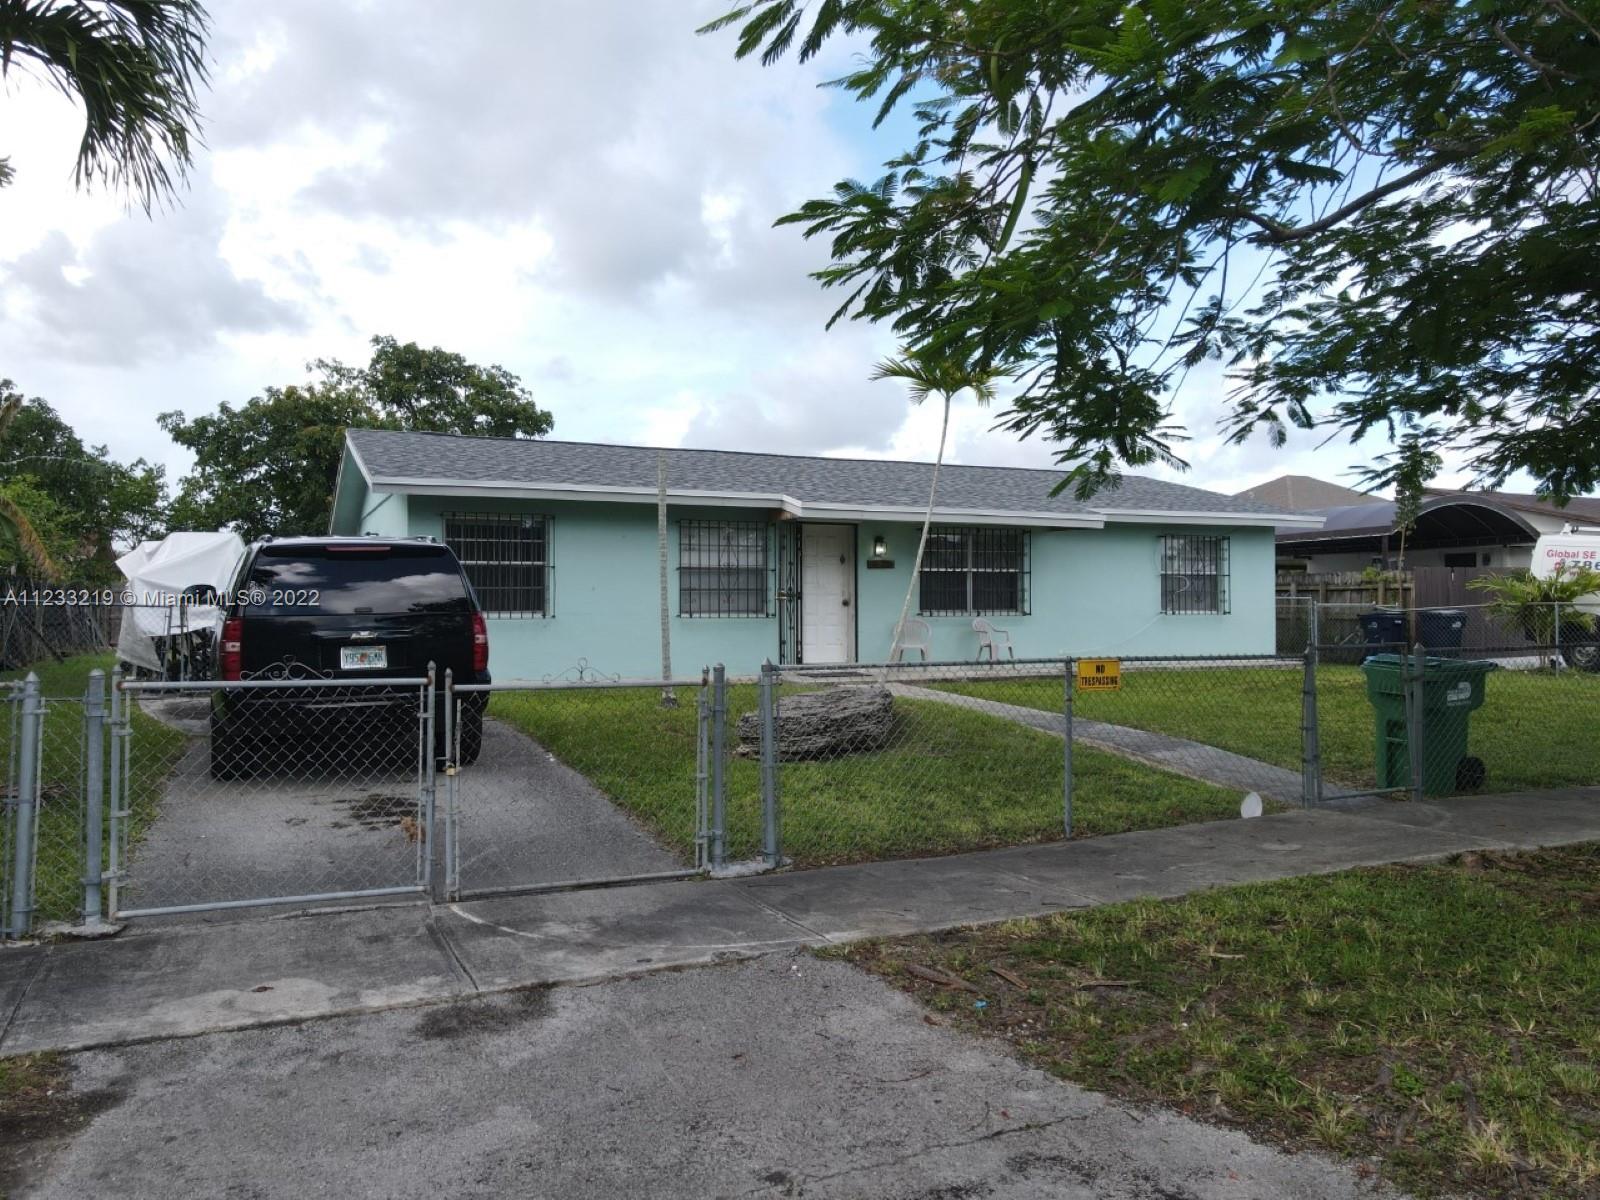 Beautiful 3/2 with Huge lot with lots of space and a blank canvas for investors. 0.17 Acre lot no HOA. Pool can be built has parking for boats or RV's. Has new roof replaced within last two years. House has fence in front of property as well as rear.